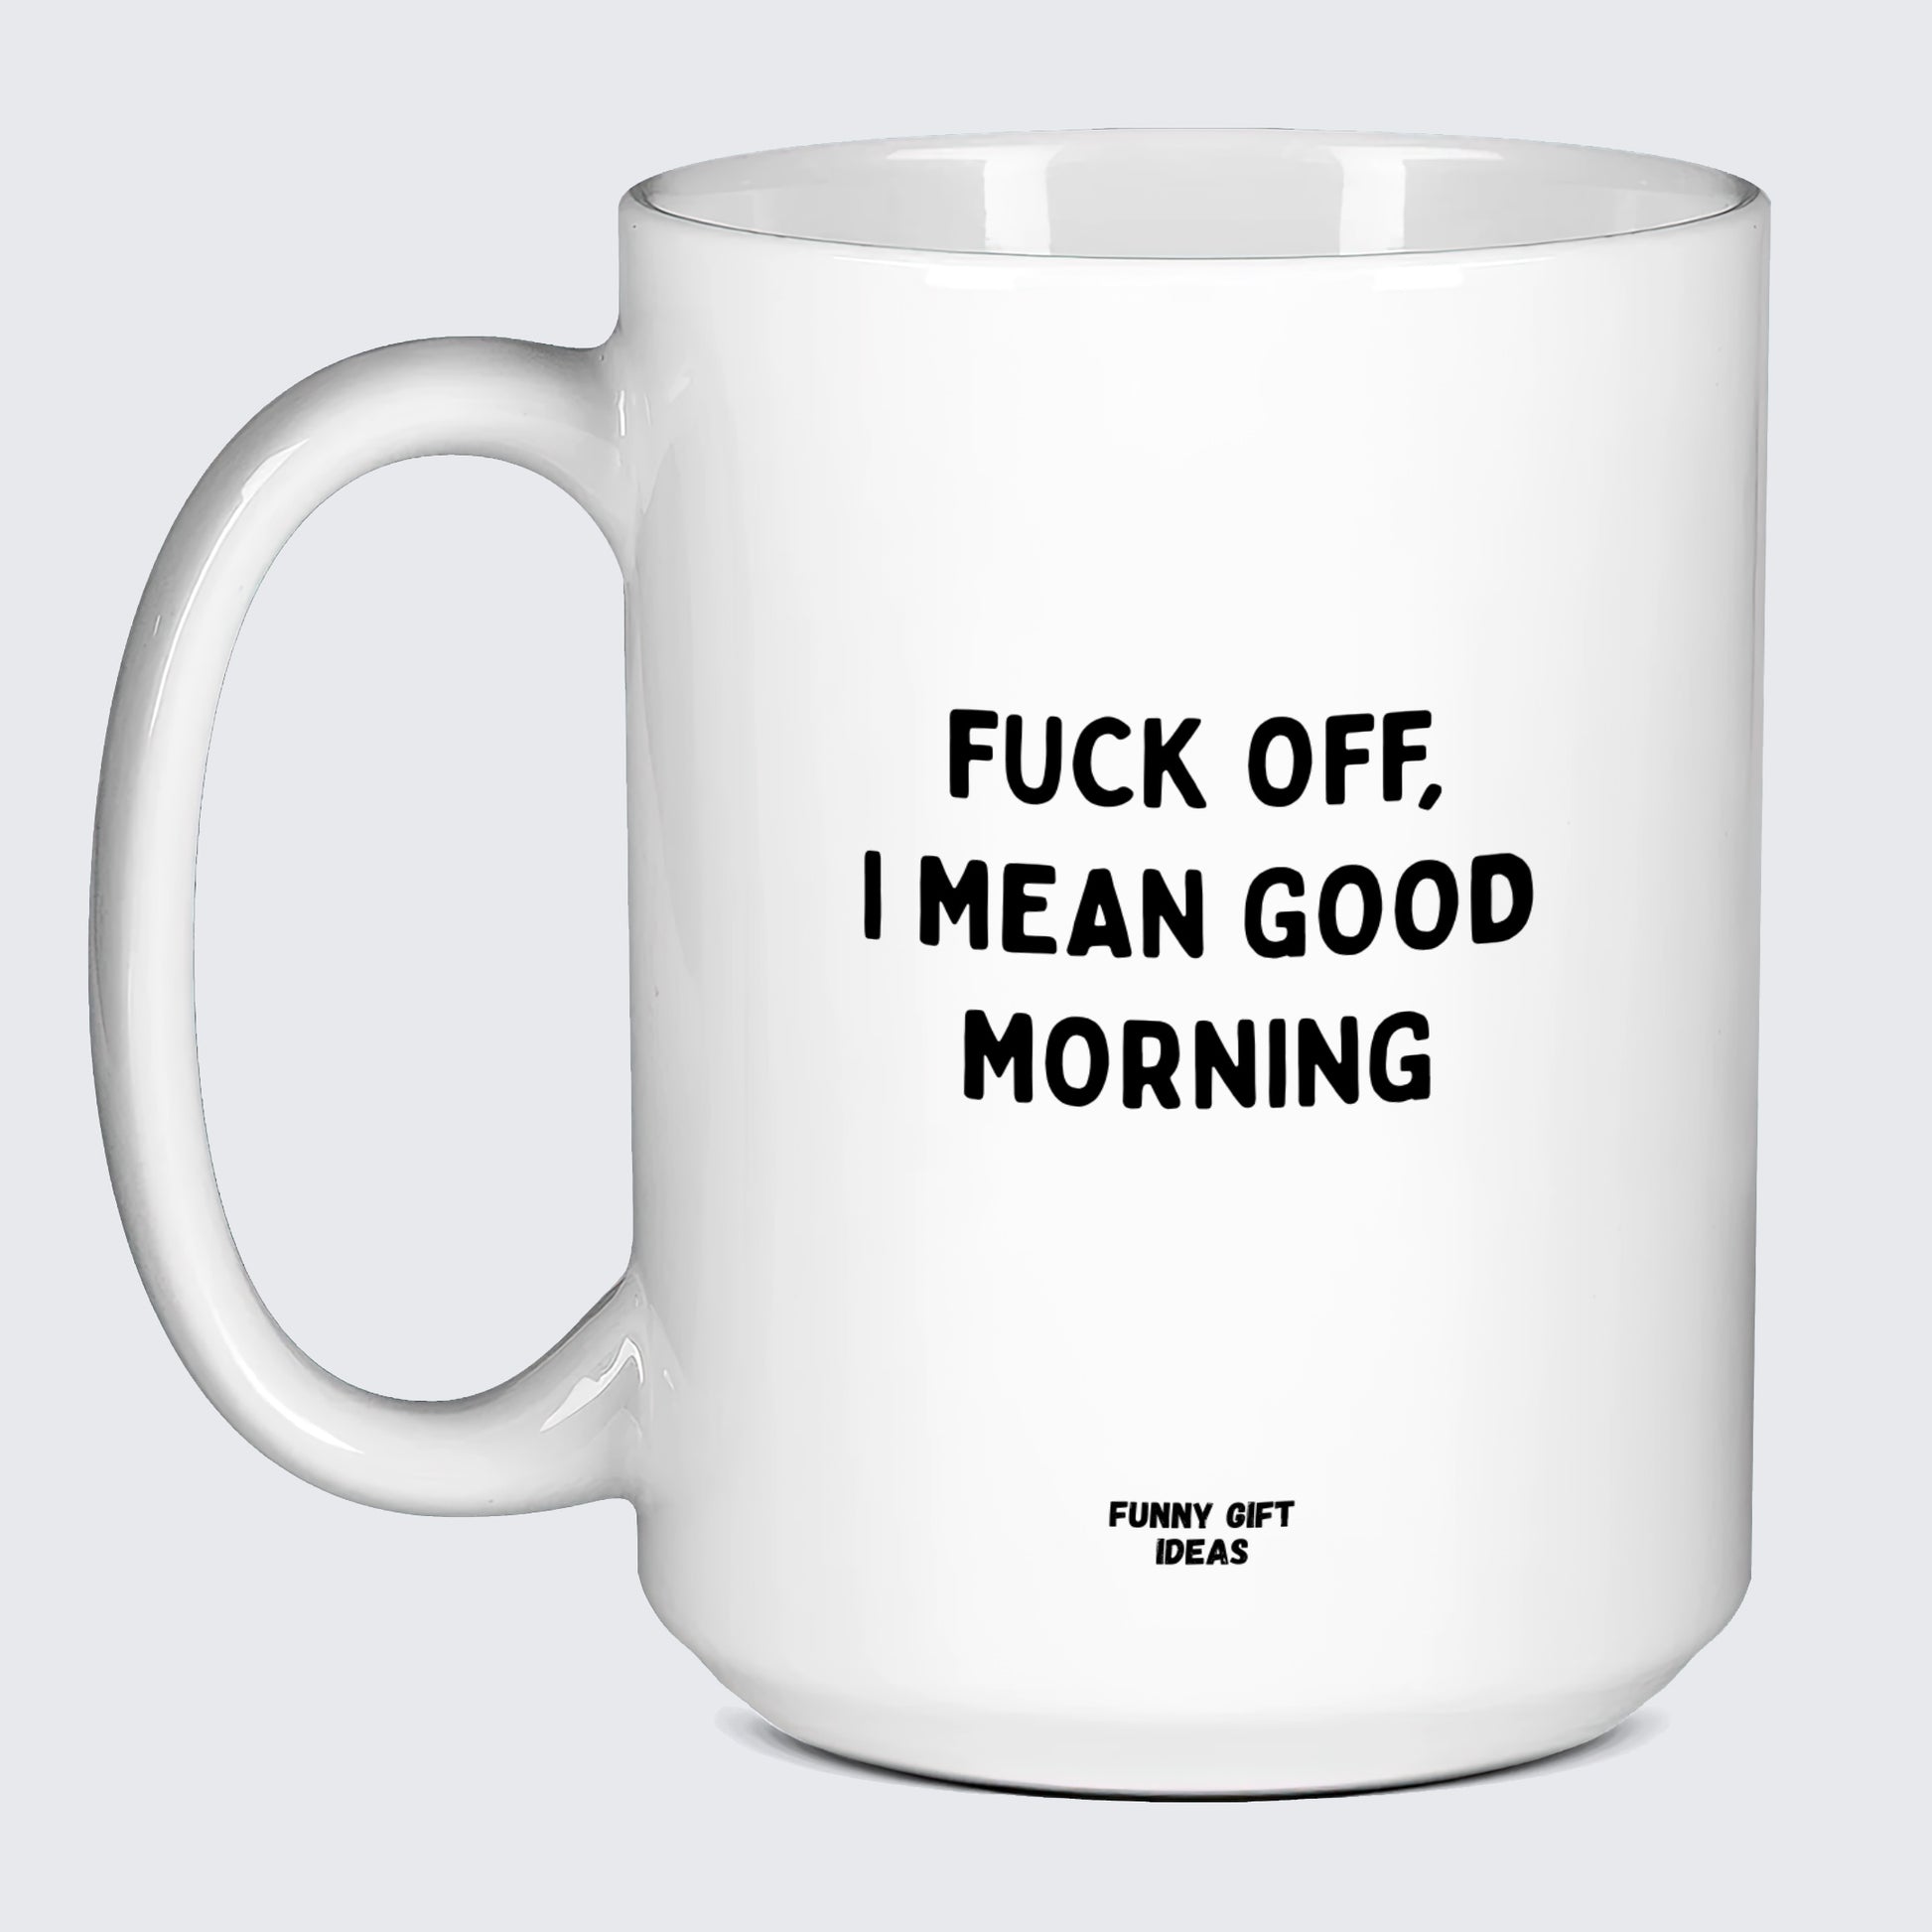 Cool Mugs Fuck Off, I Mean Good Morning - Funny Gift Ideas